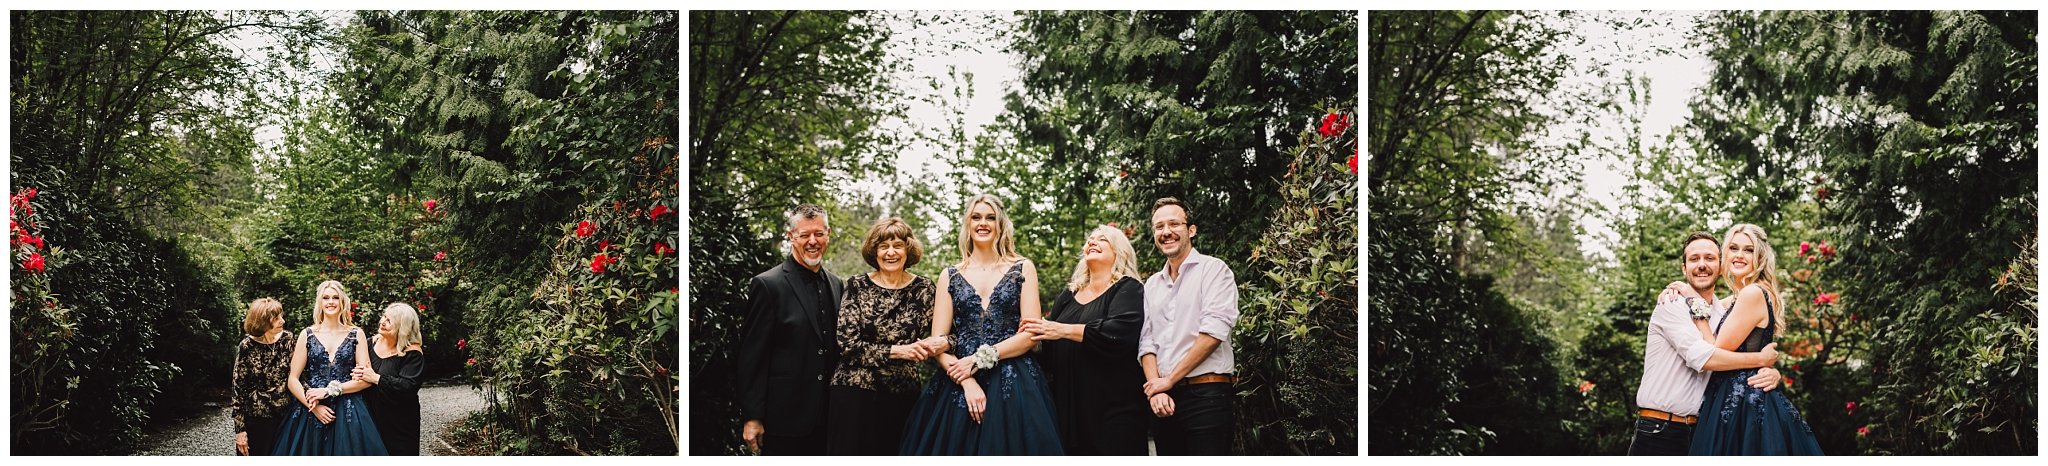 Best-Family-Photographer- Abbotsford-Chilliwack-Mission